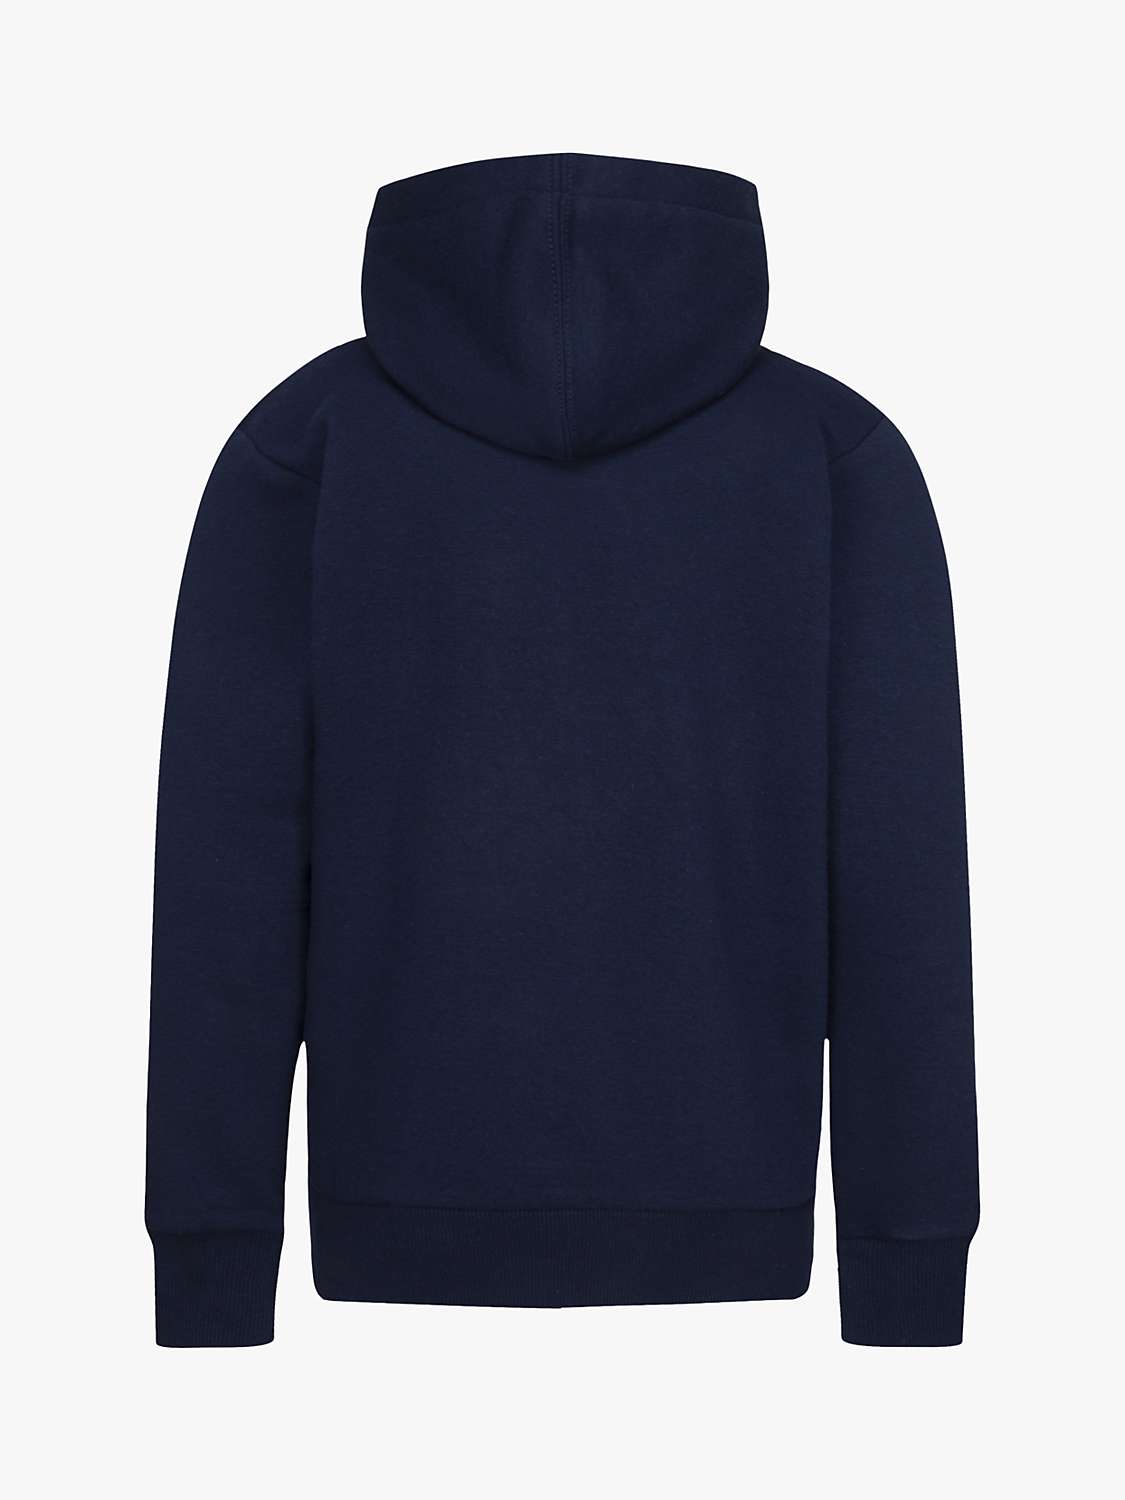 Converse Kids' Chuck Patch Logo Hoodie, Obsidian at John Lewis & Partners